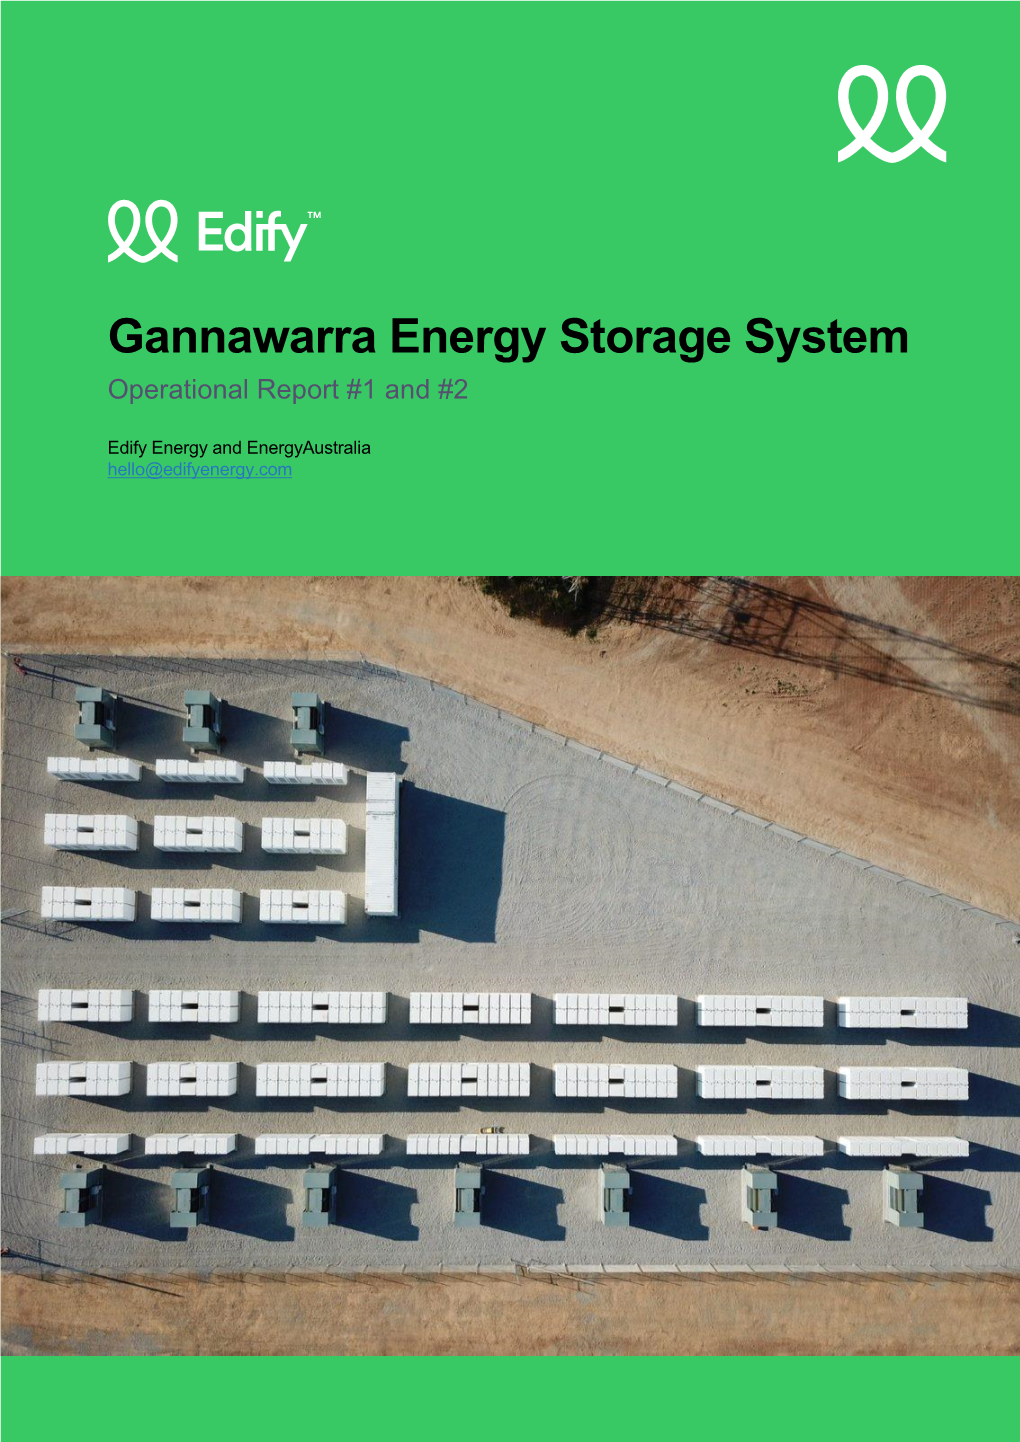 Gannawarra Energy Storage System Operational Report #1 and #2